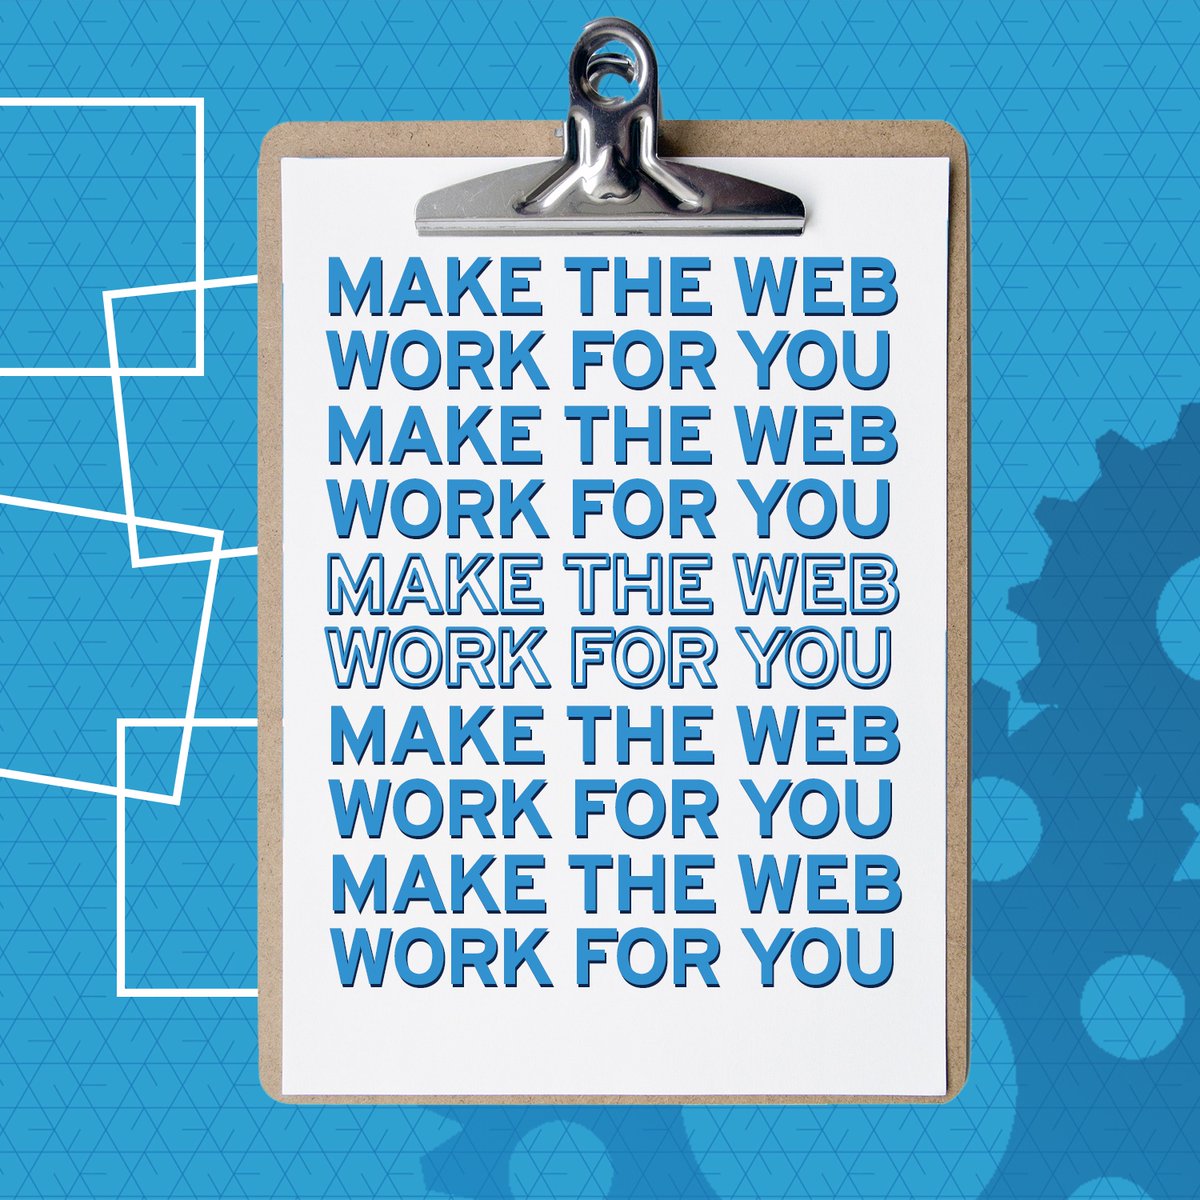 It's time to make the web work for you! Whether it's creating a user-friendly website, or building a strong social media presence, the possibilities are endless. 💻

Visit us online!👇
legendwebworks.com 
 #Cincinnati #LegendWebWorks #CincinnatiMarketing #CincinnatiWebDesign